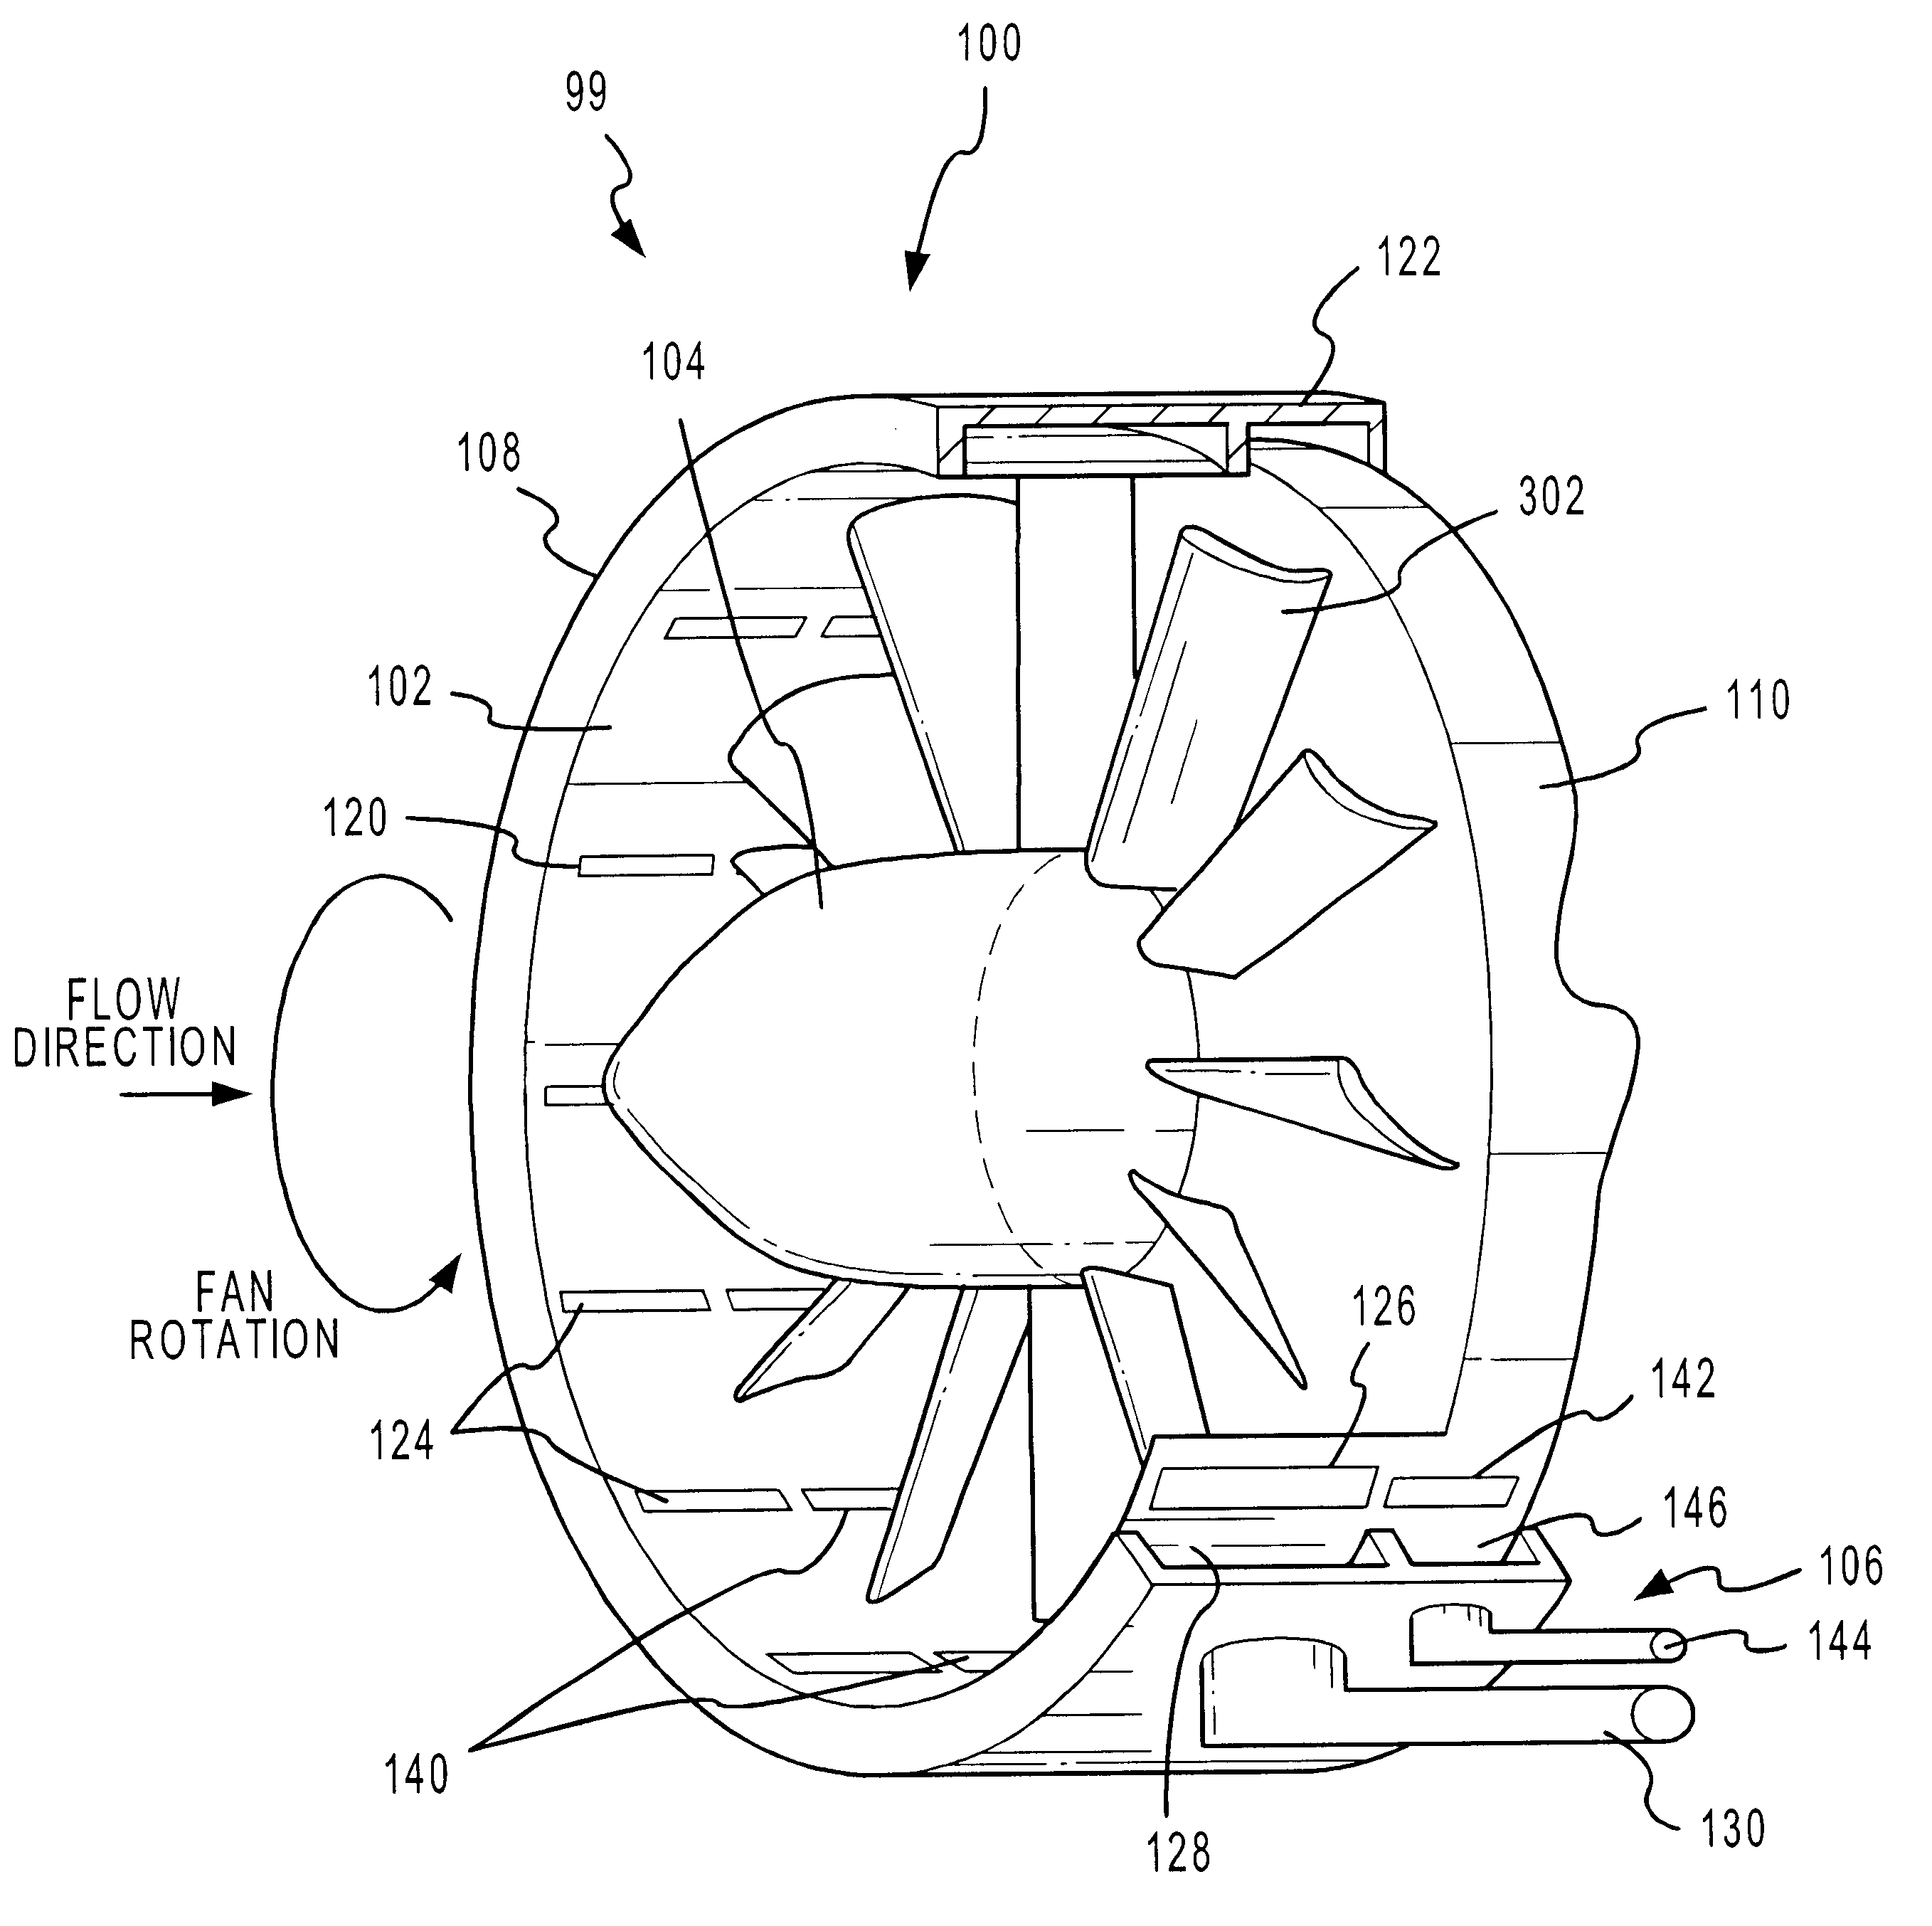 Method and apparatus for a fan noise controller